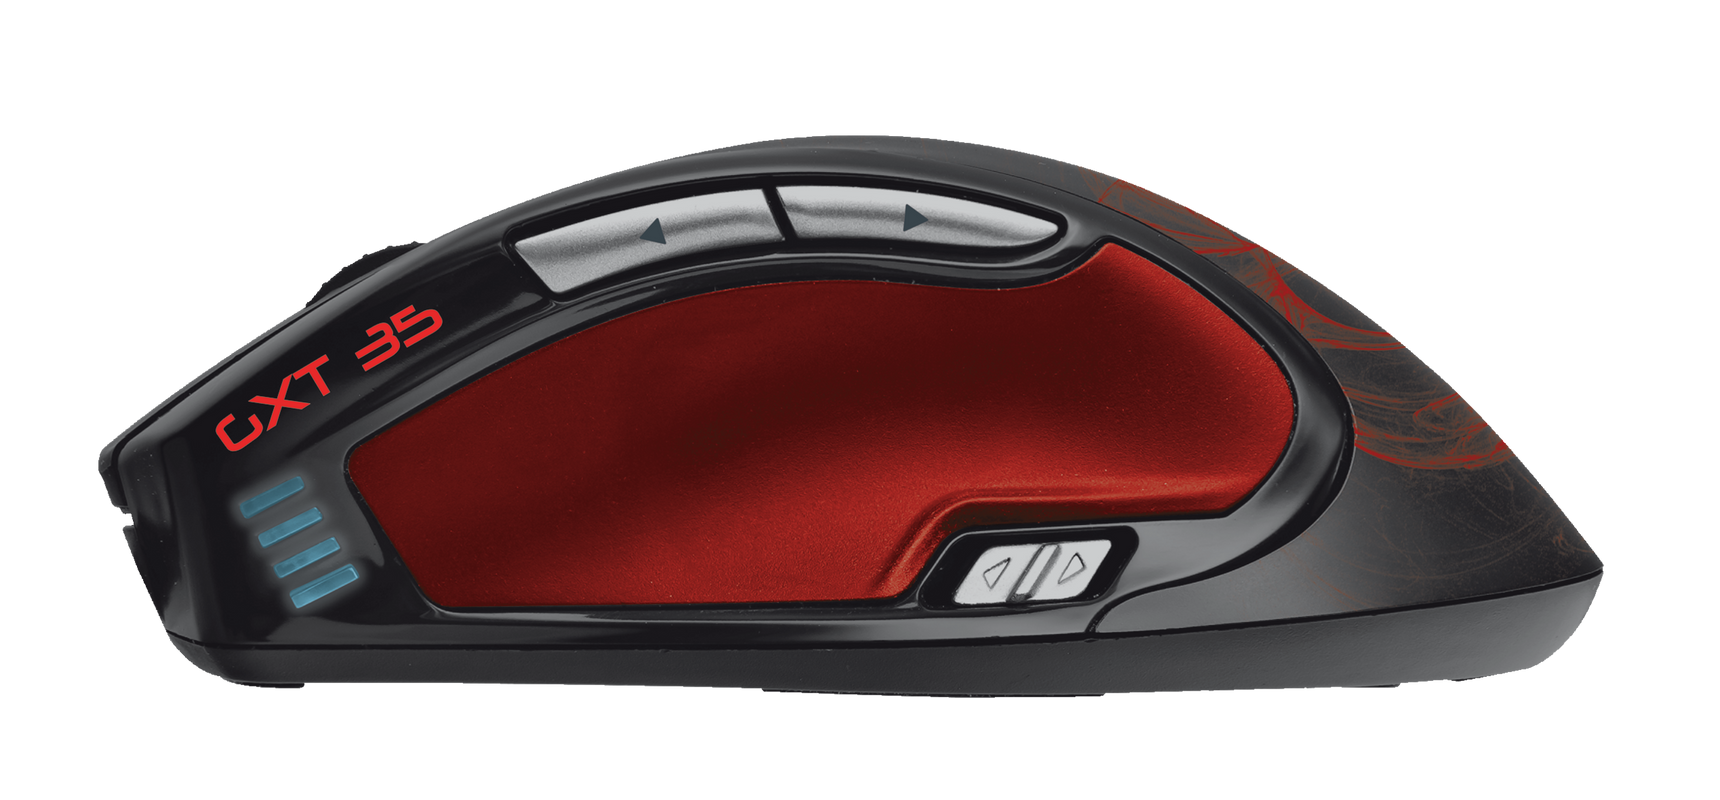 GXT 35 Wireless Laser Gaming Mouse-Side